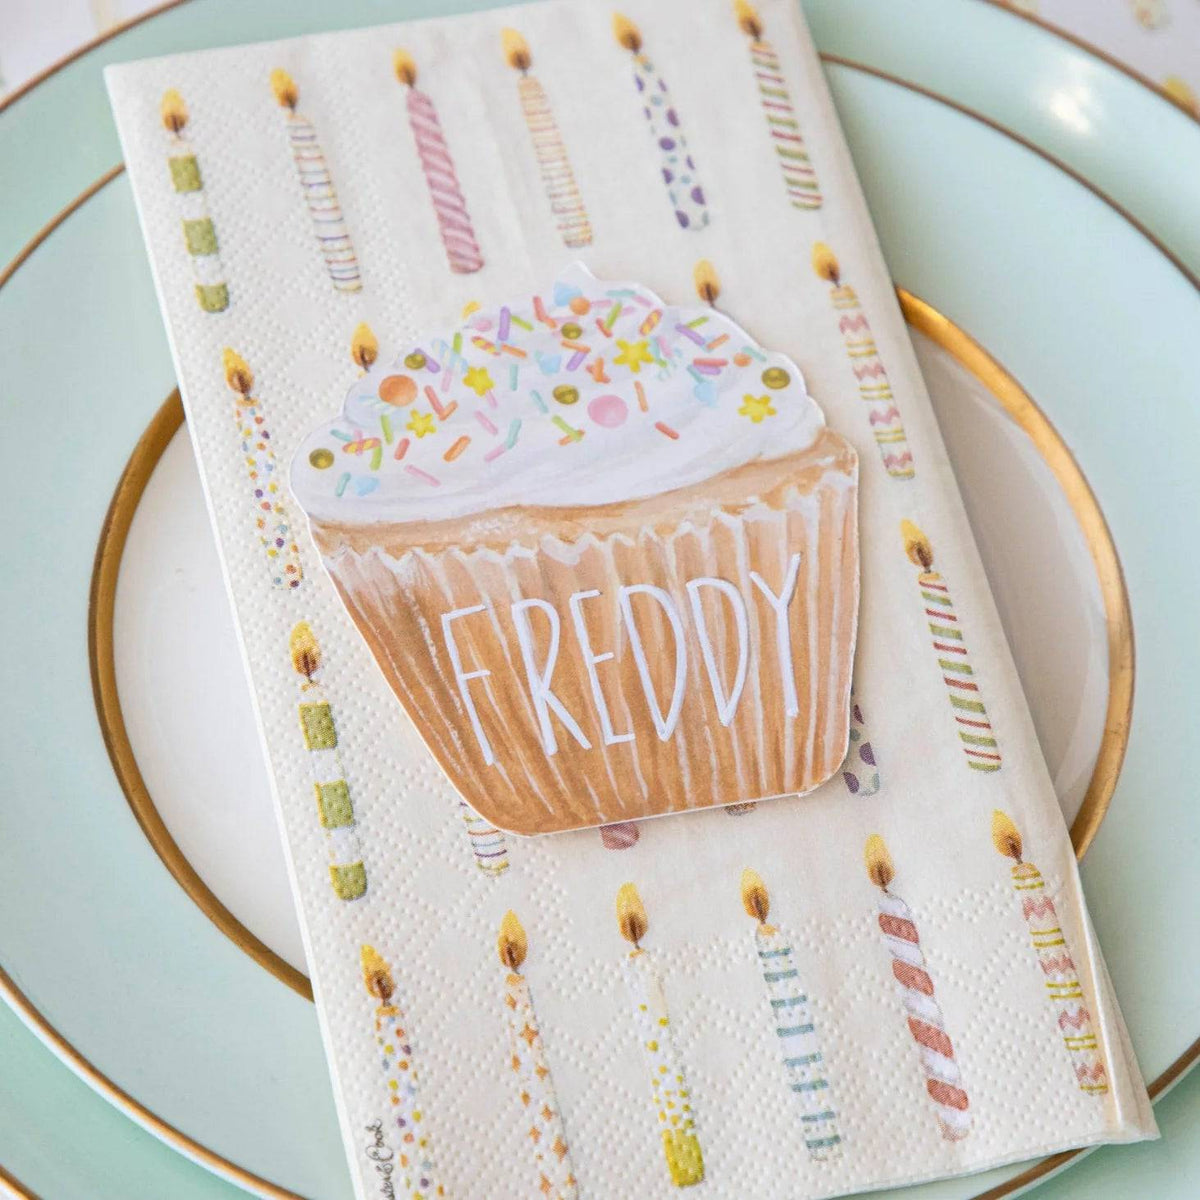 Cupcake Place Cards - The Preppy Bunny